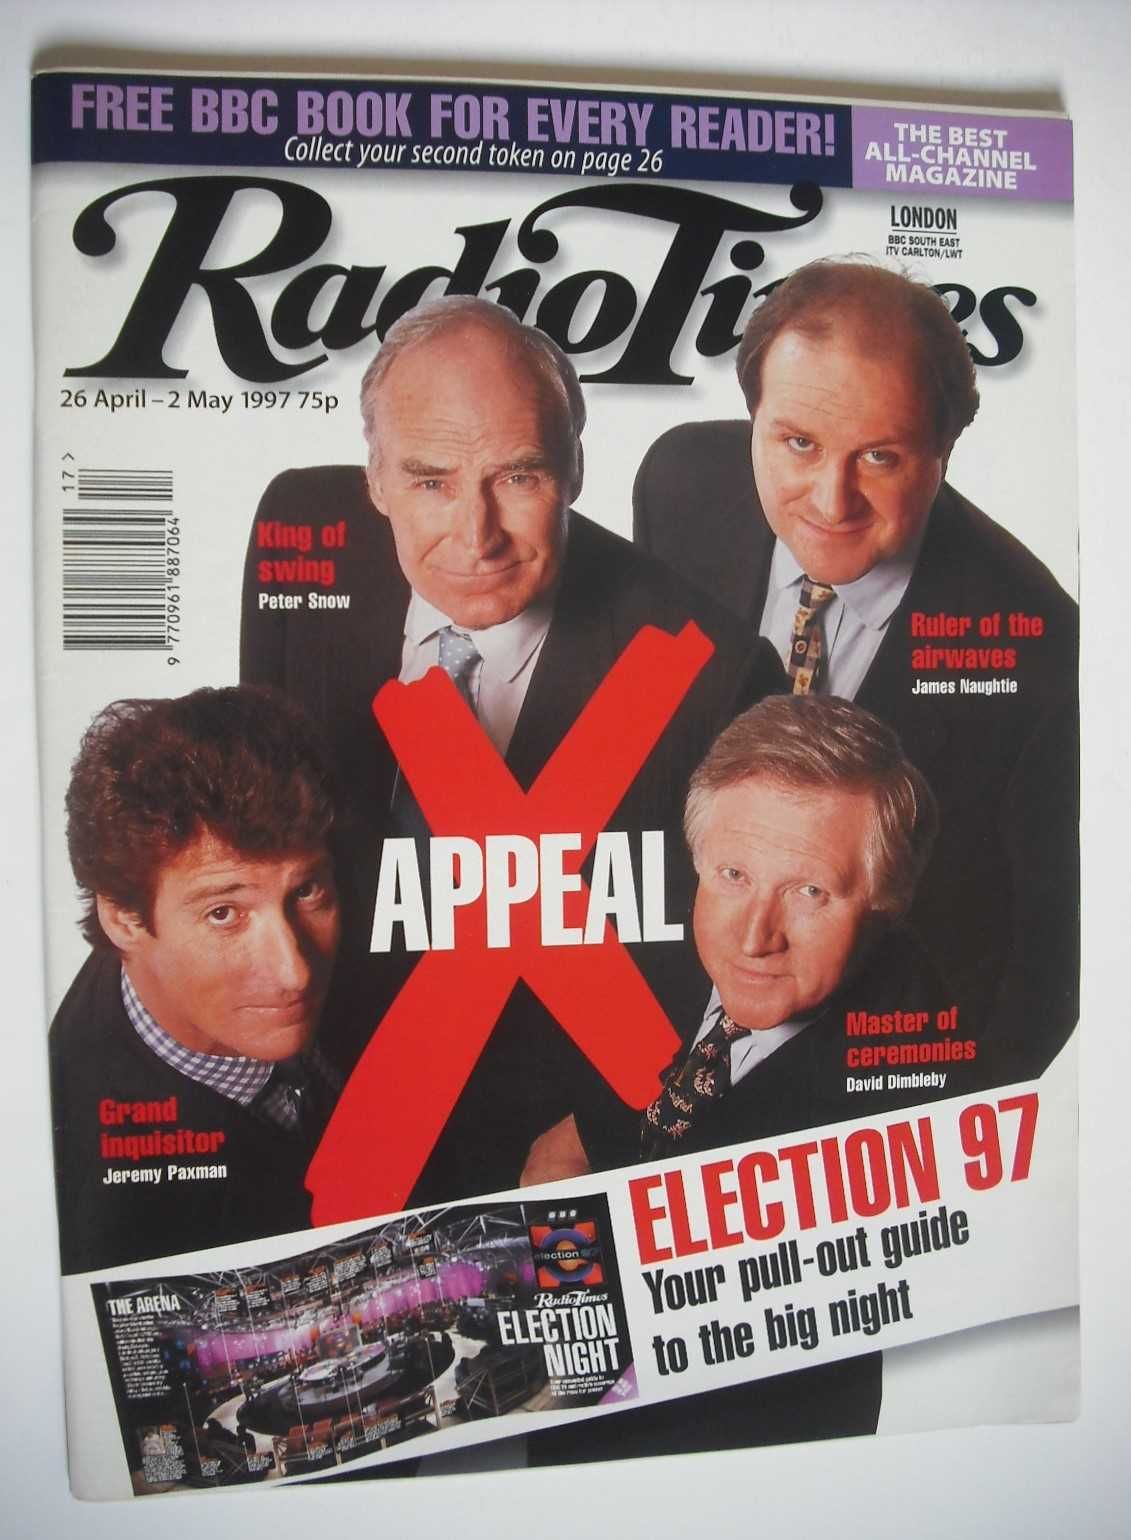 <!--1997-04-26-->Radio Times magazine - Election 97 cover (26 April-2 May 1